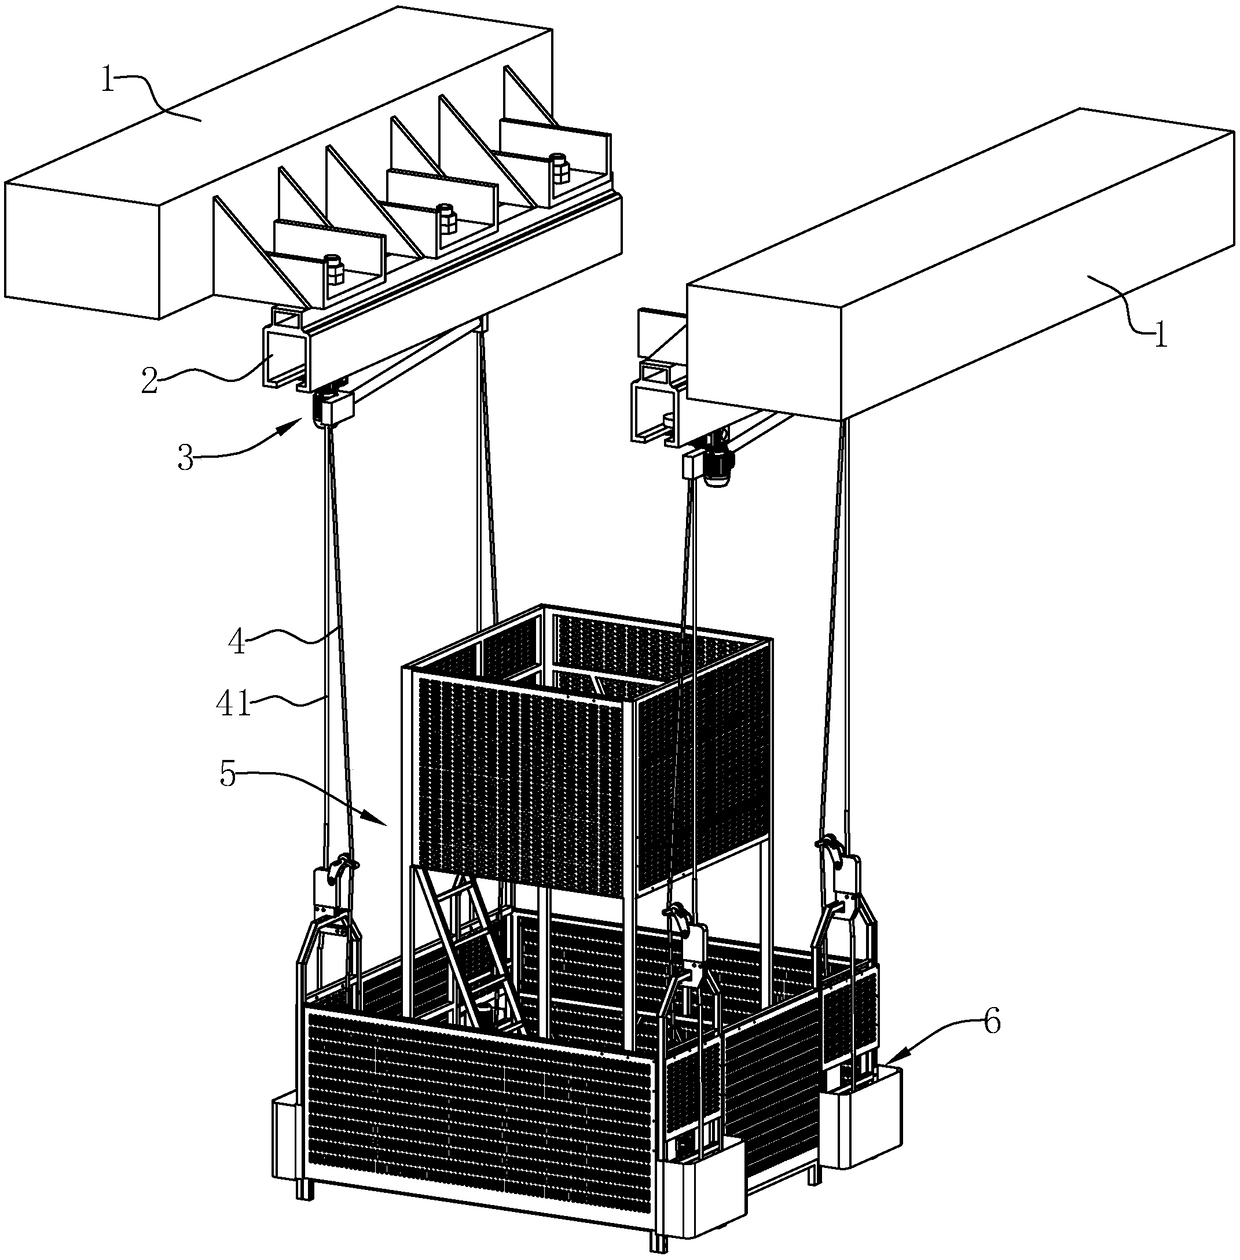 Rail-mounted working platform for building high-altitude suspension construction and capable of horizontally and vertically walking